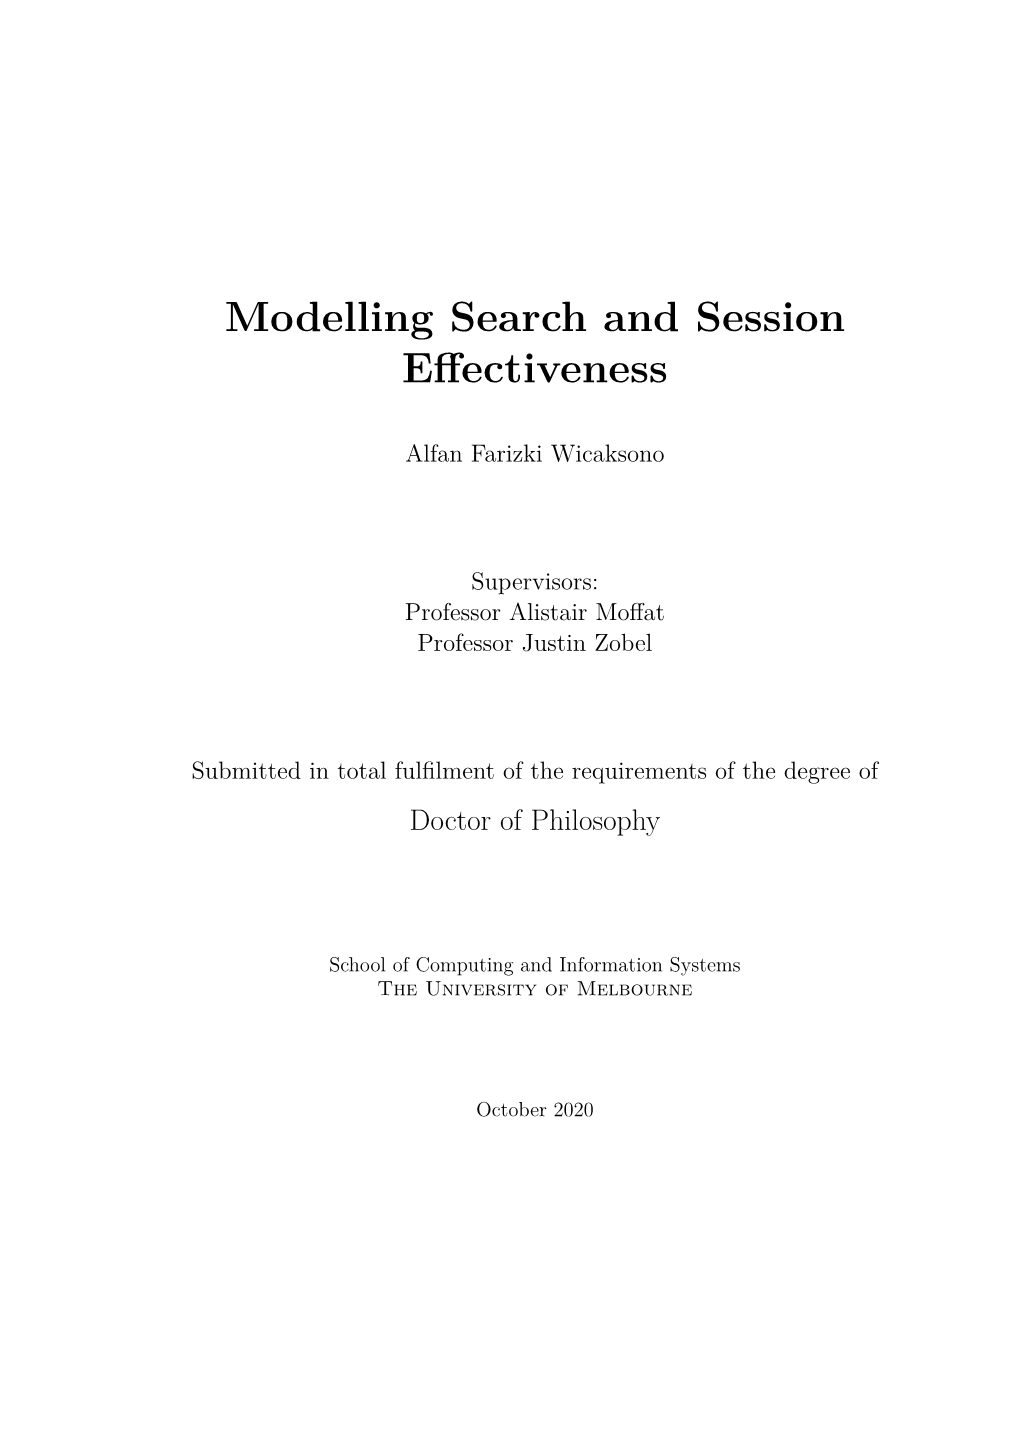 Modelling Search and Session Effectiveness